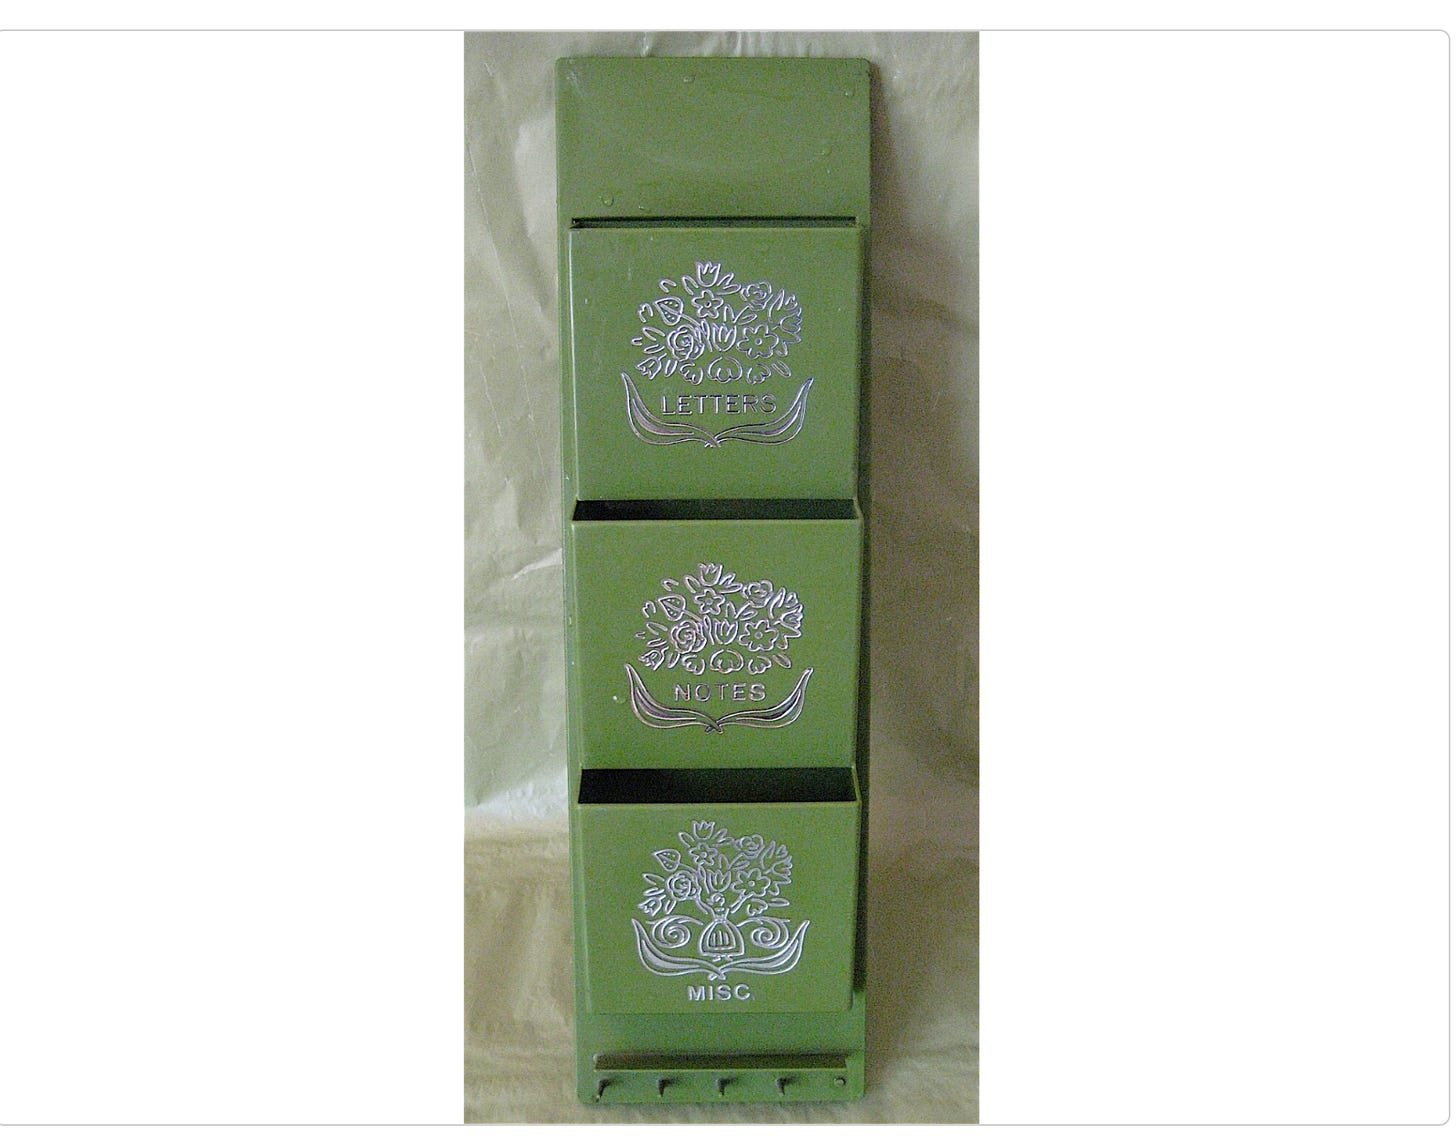 Photo of an avocado green organizer with three compartments labeled "LETTERS," "NOTES," and "MISC." The caption notes this item sold on Etsy for $12 in 2008 after failing to sell on eBay for 99 cents.